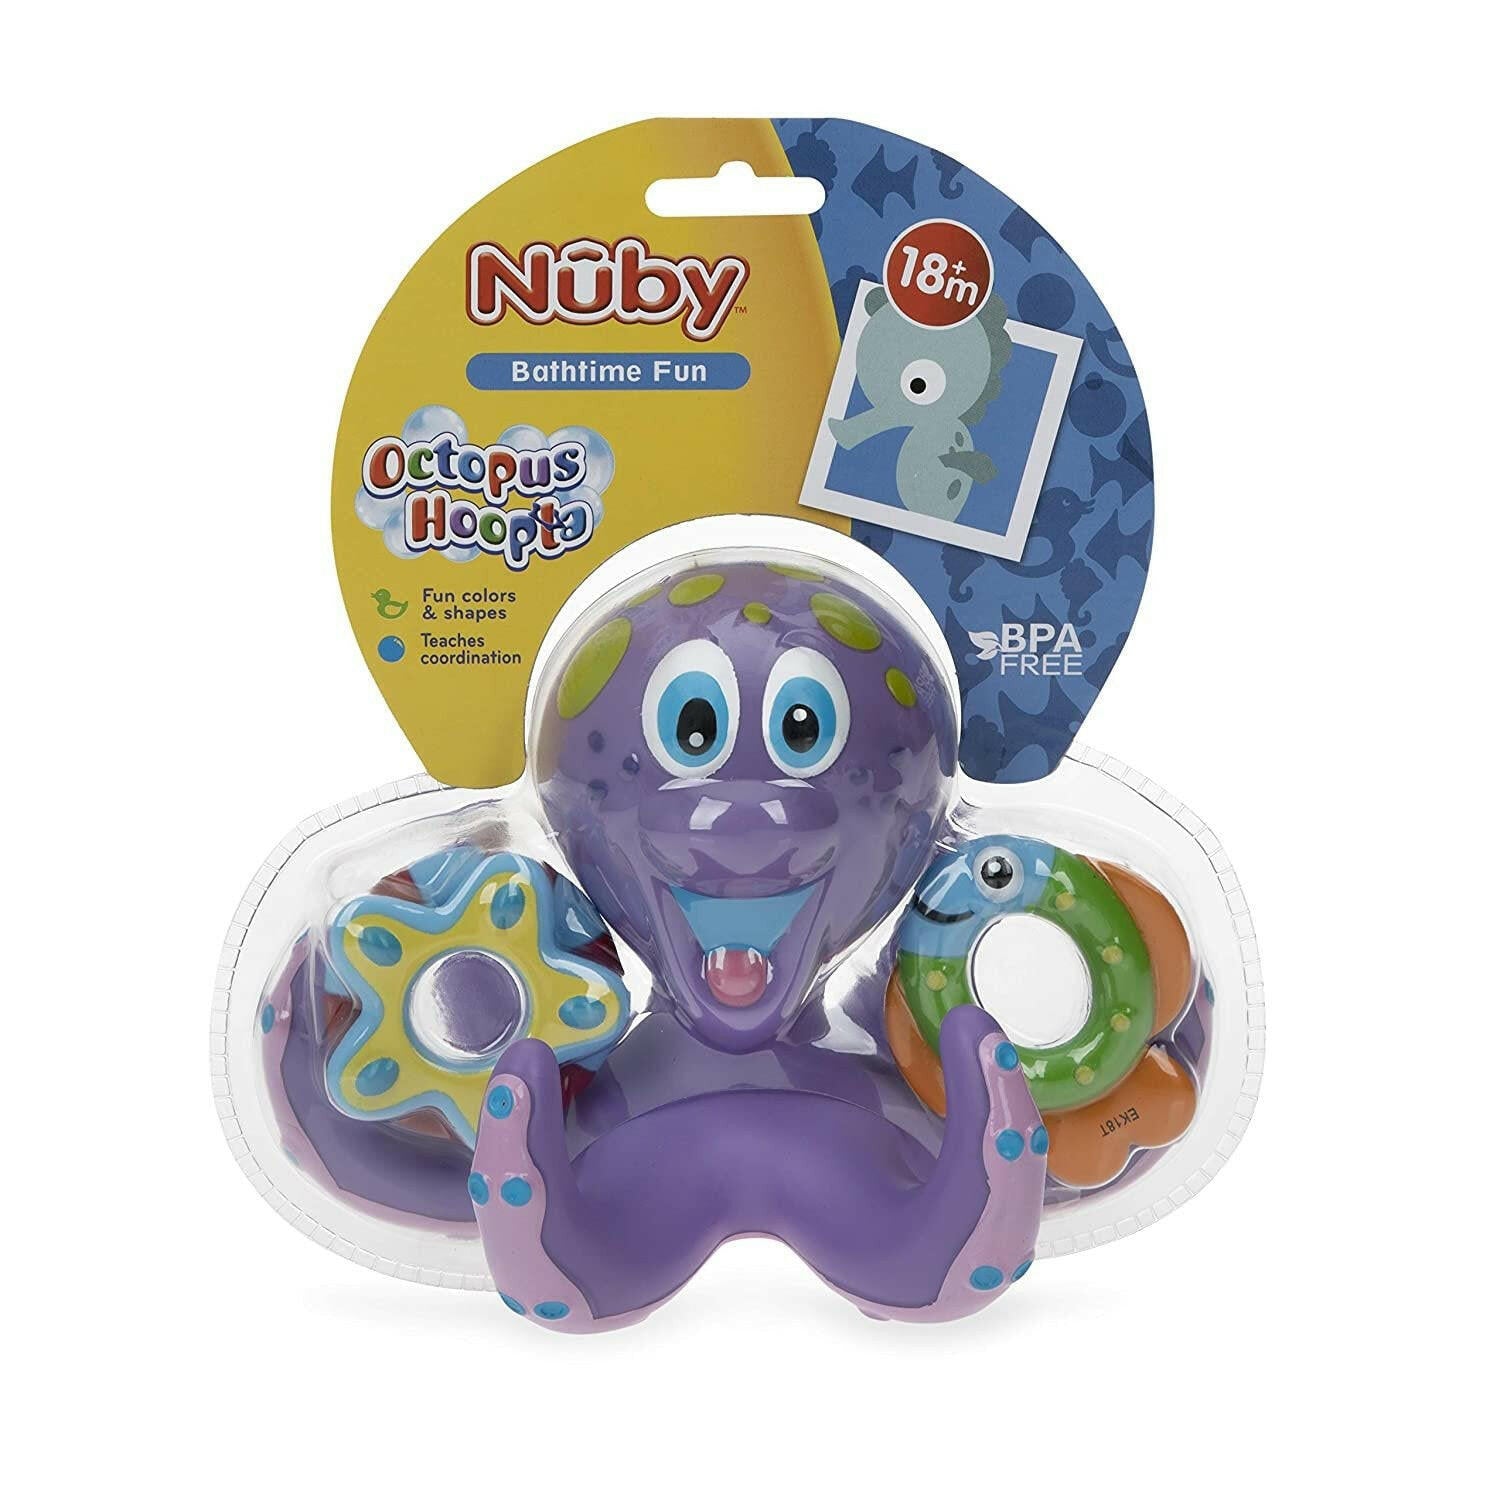 Nuby Floating Purple Octopus with 3 Hoopla Rings Interactive Bath Toy.